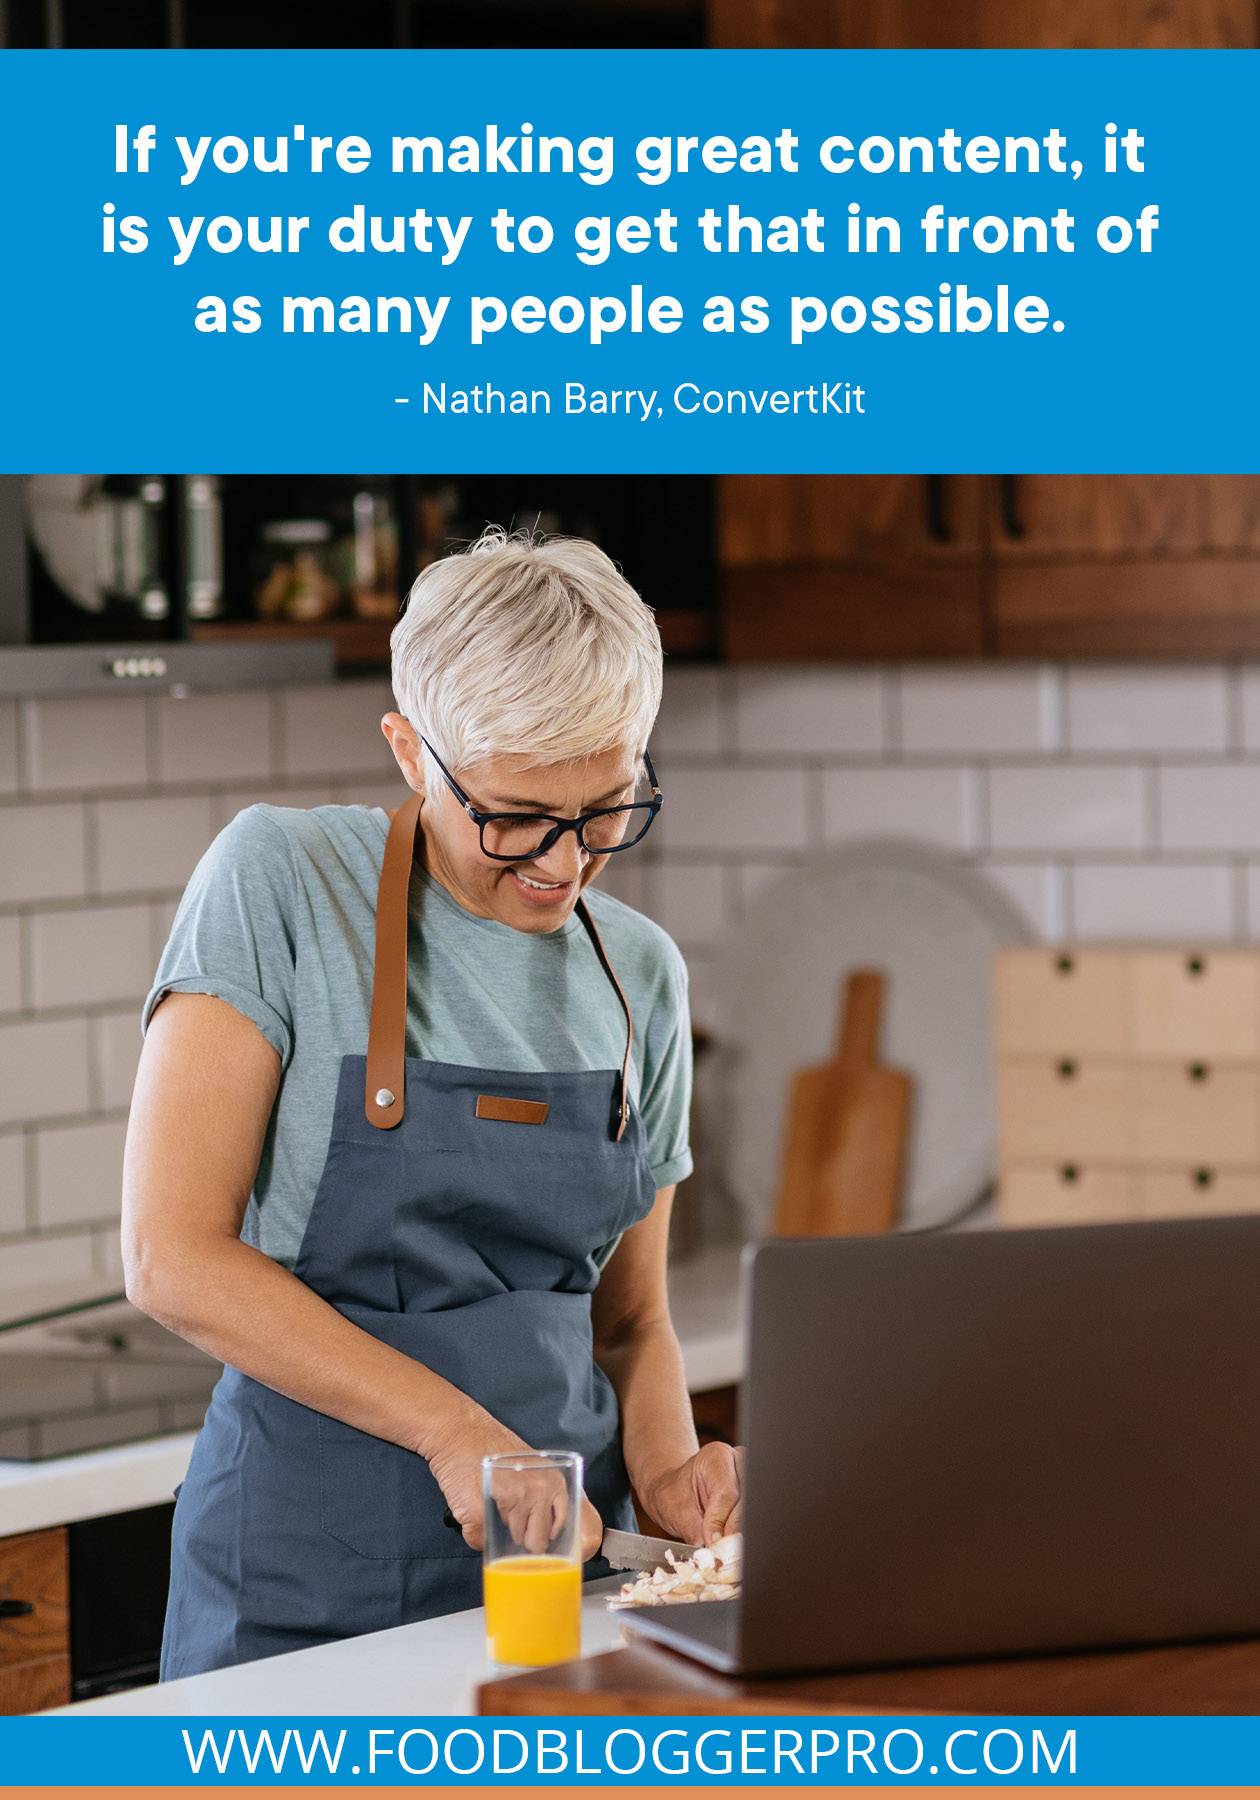 A photograph of a woman chopping on a cutting board in front of a laptop with a quote from Nathan Barry's episode of The Food Blogger Pro Podcast, "If you're making great content, it is your duty to get that in front of as many people as possible."